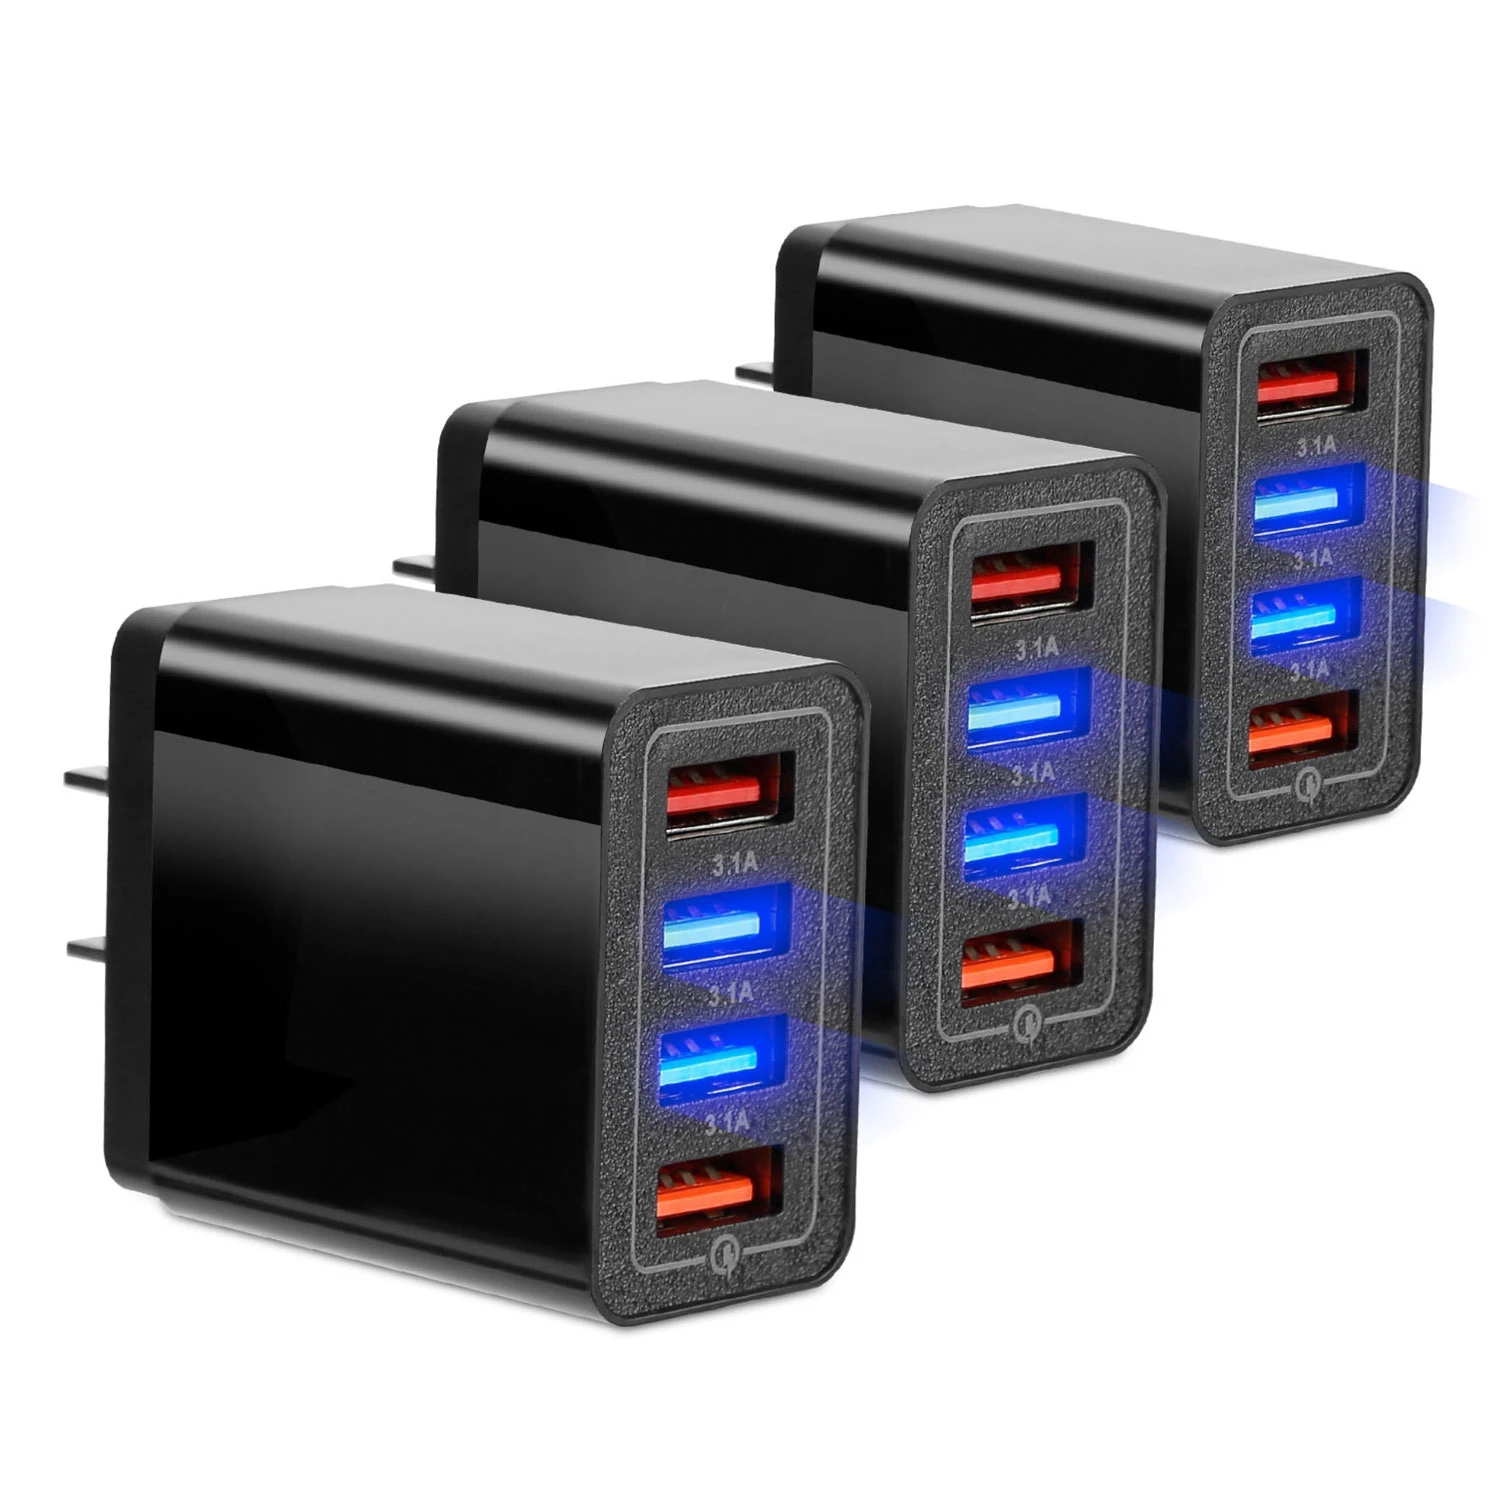 4-Pack USB Wall Charger: Fast Charging Adapter for Samsung Galaxy, iPhone, and More